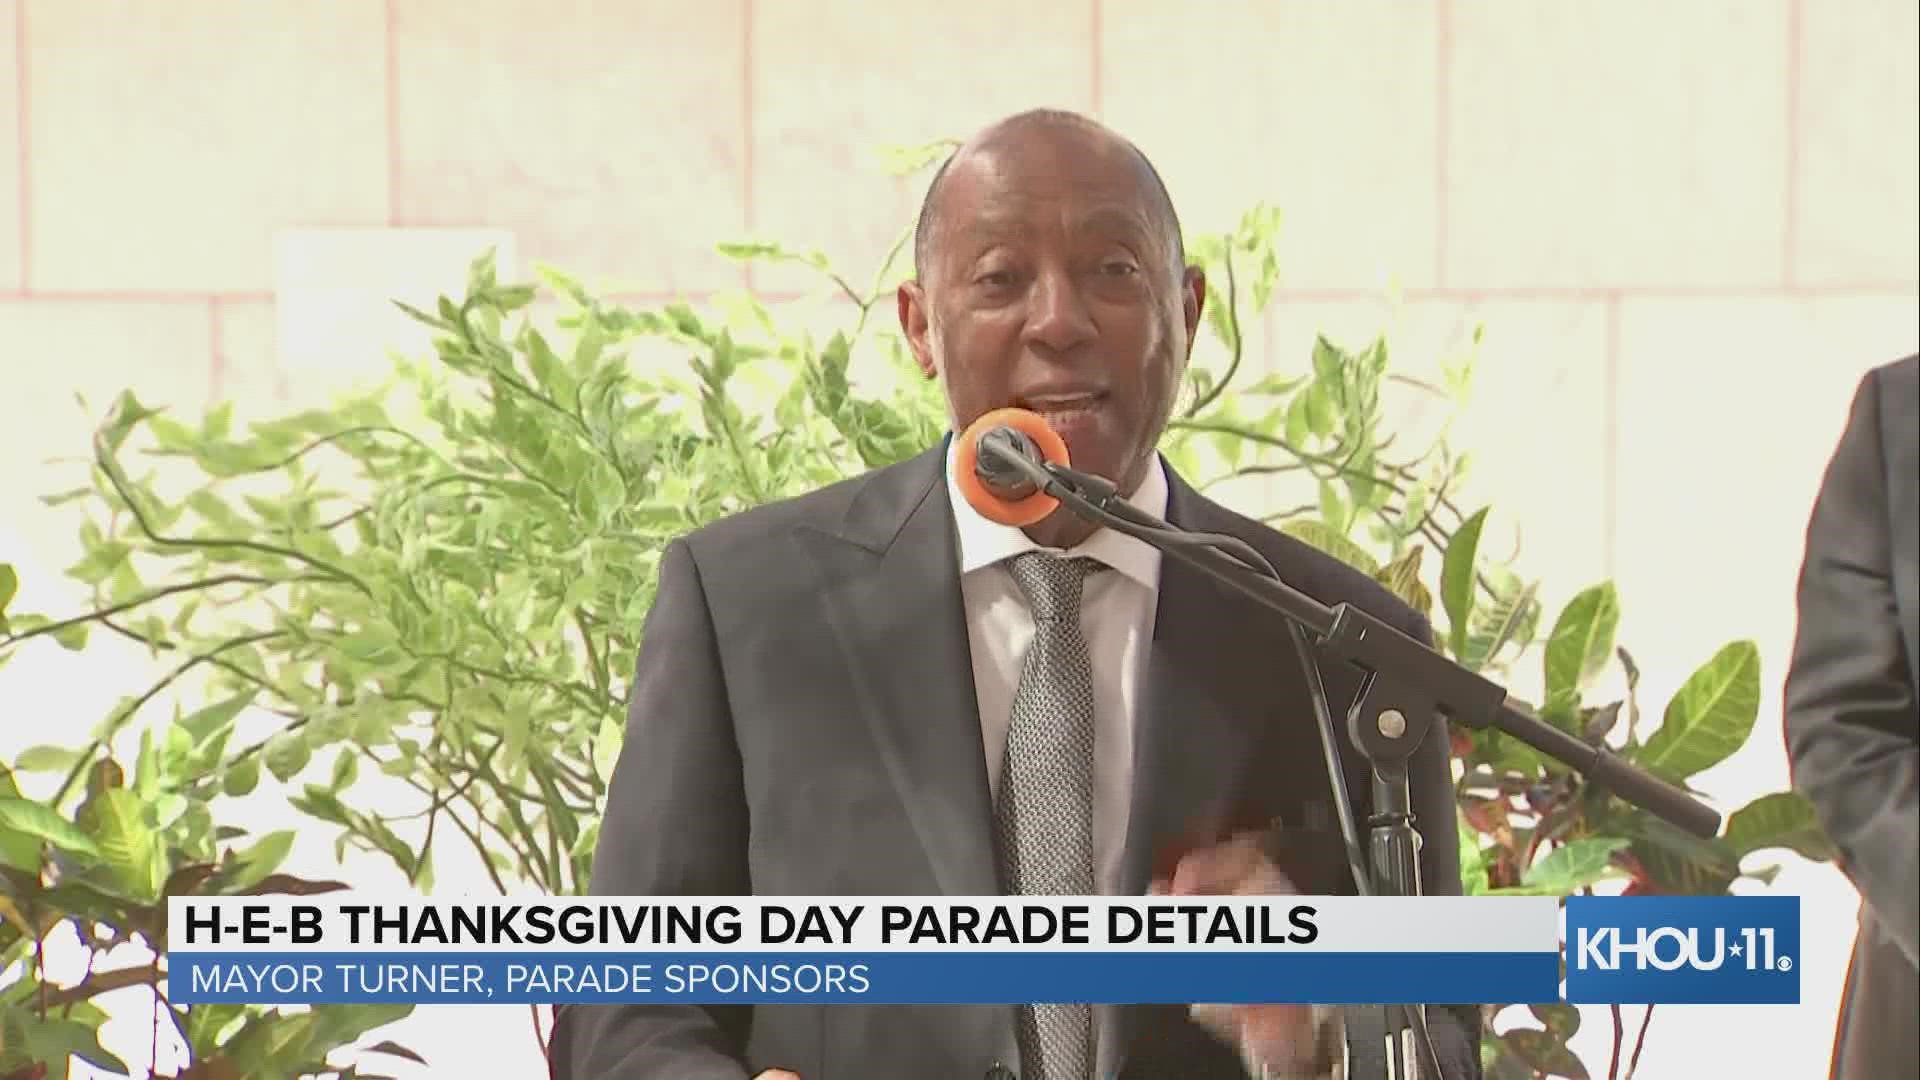 Mayor Turner and sponsors share details of the 72nd Annual H-E-B Thanksgiving Day Parade.